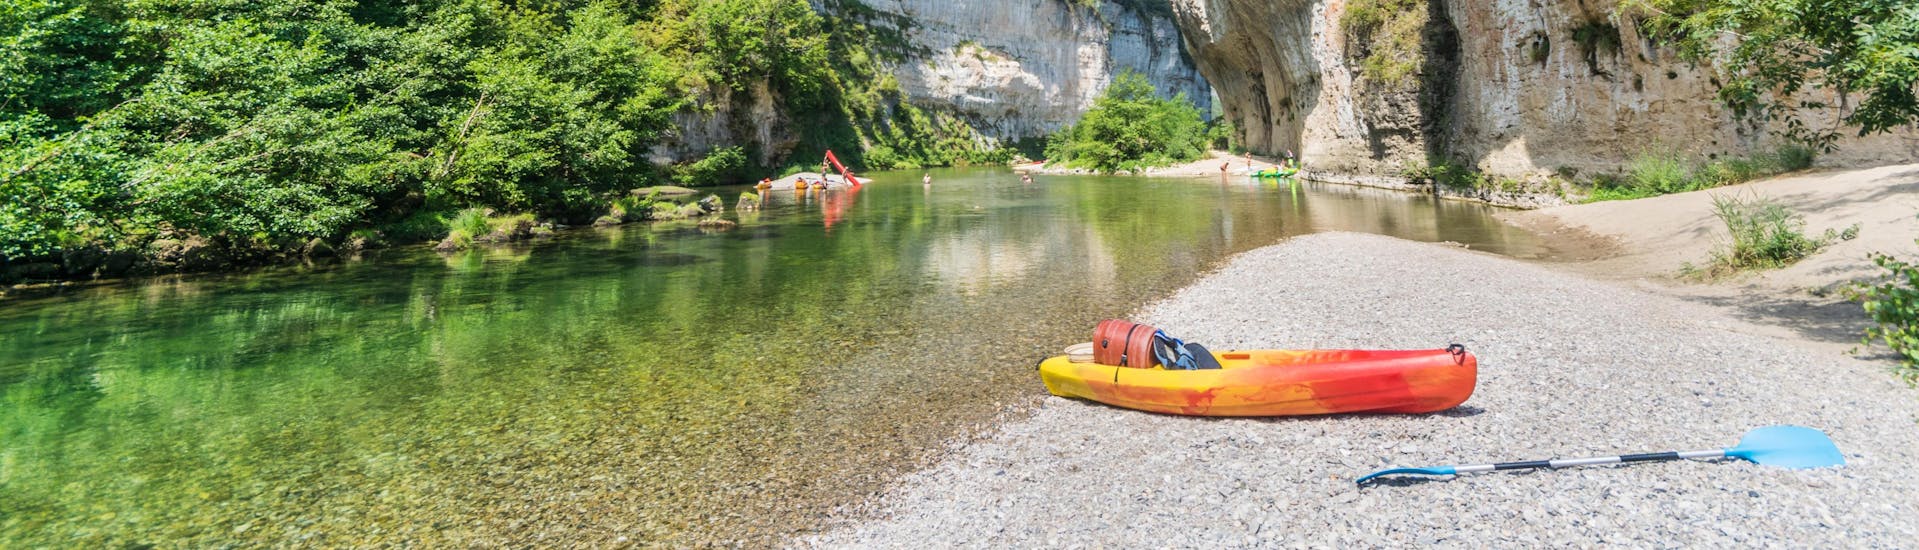 A canoe is resting on one of the natural beaches of the Gorges du Tarn, one of the favourite places for canoeing in France.